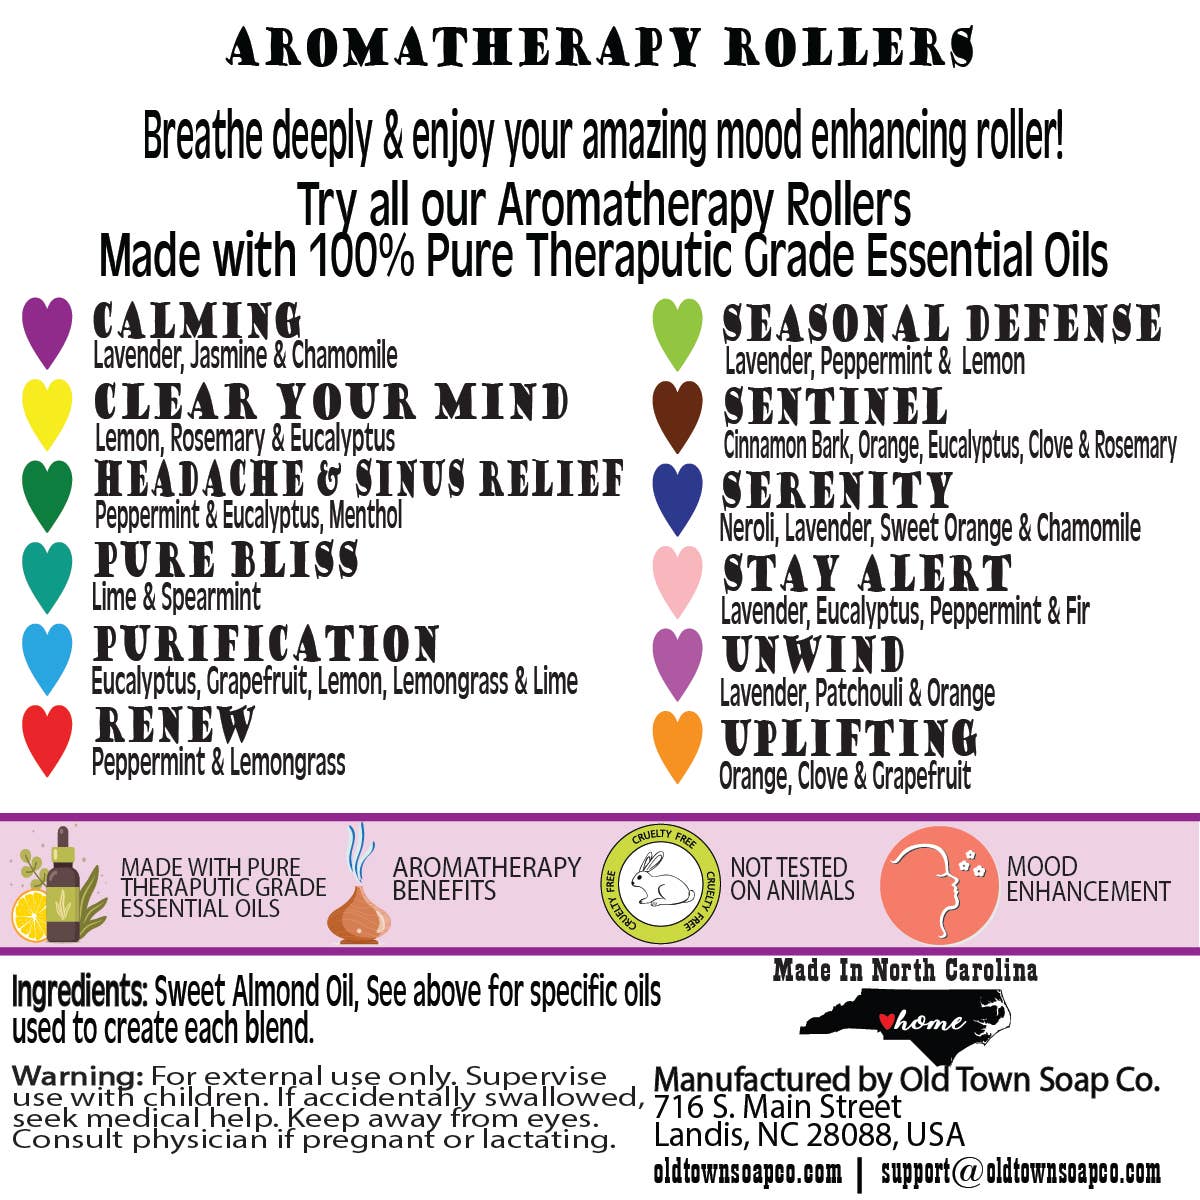 Aromatherapy Rollers in ALL our LOVED Shower Bomb Scents: Headache & Sinus